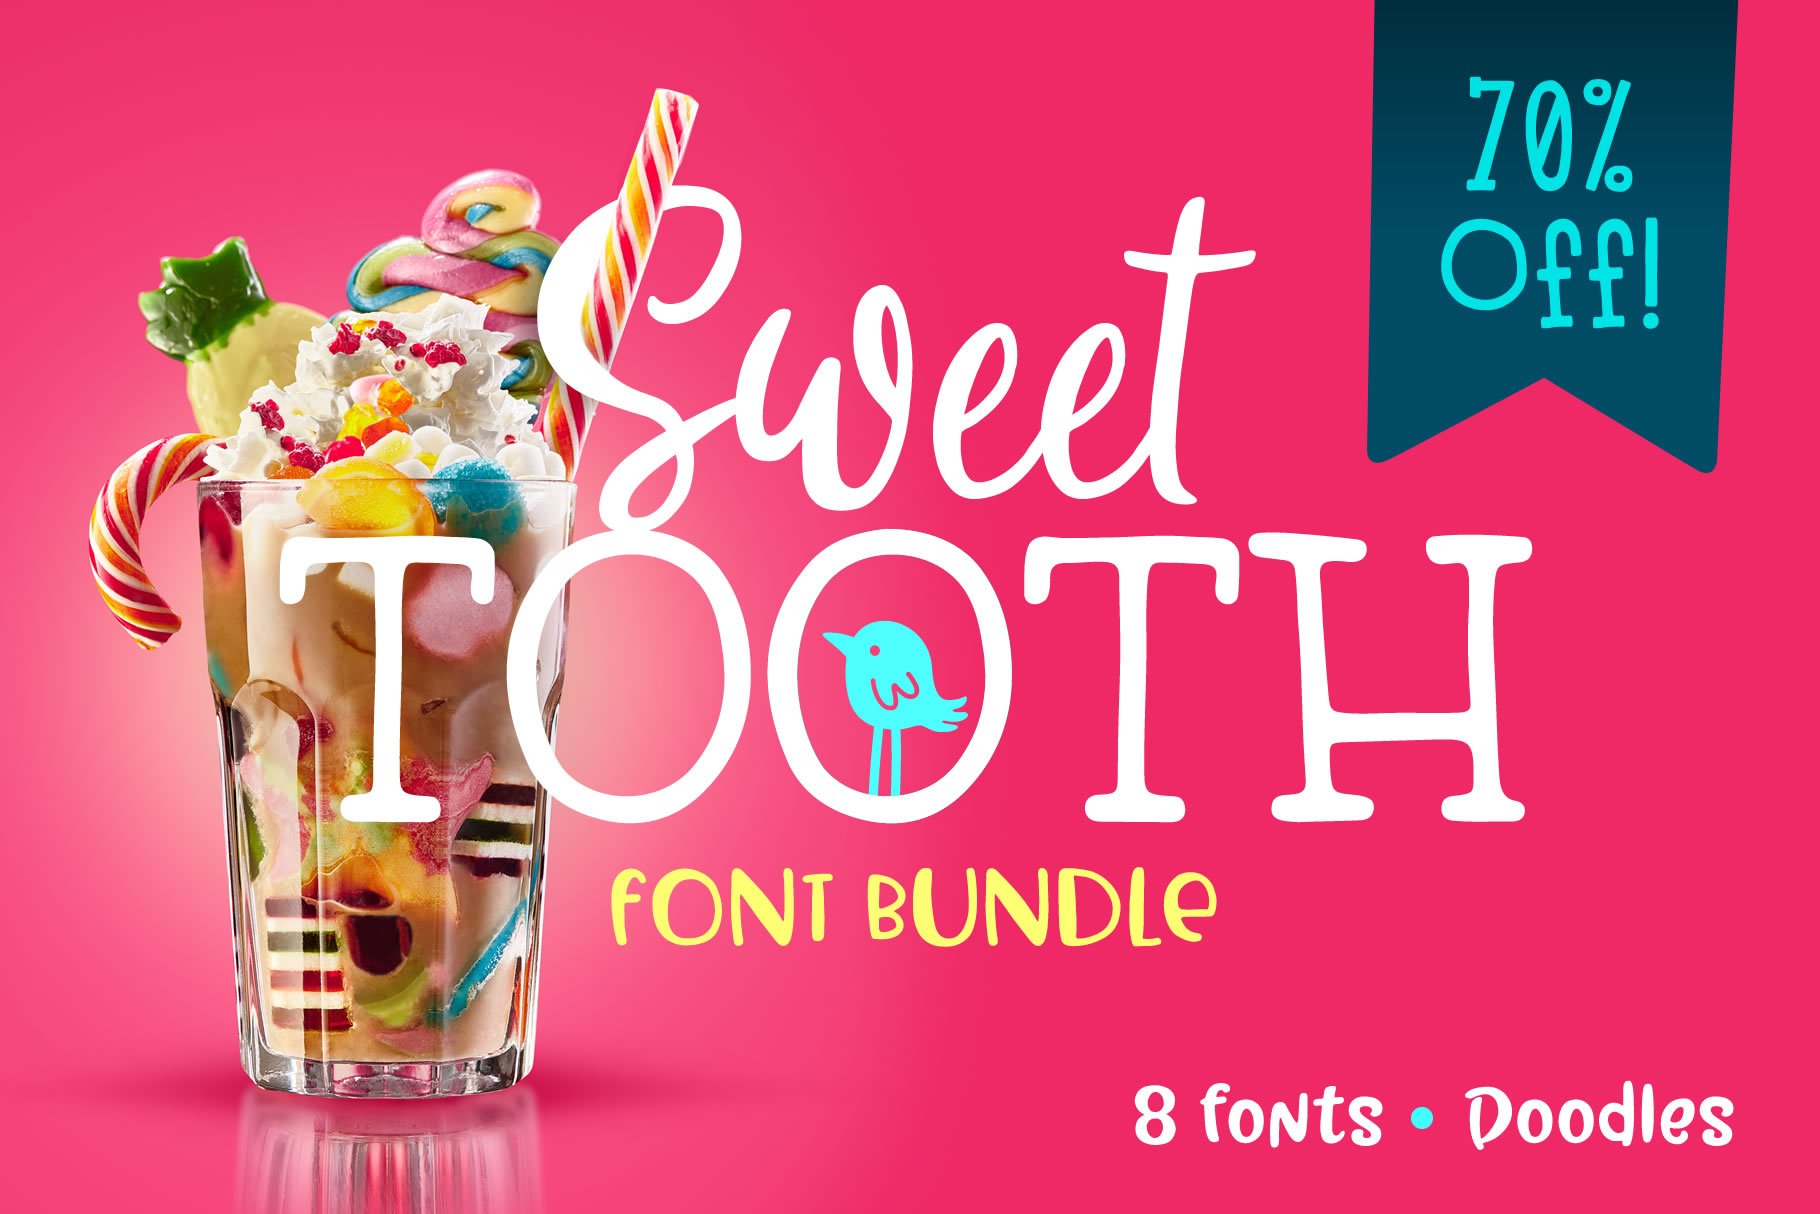 Sweet Tooth Font Bundle cover image.